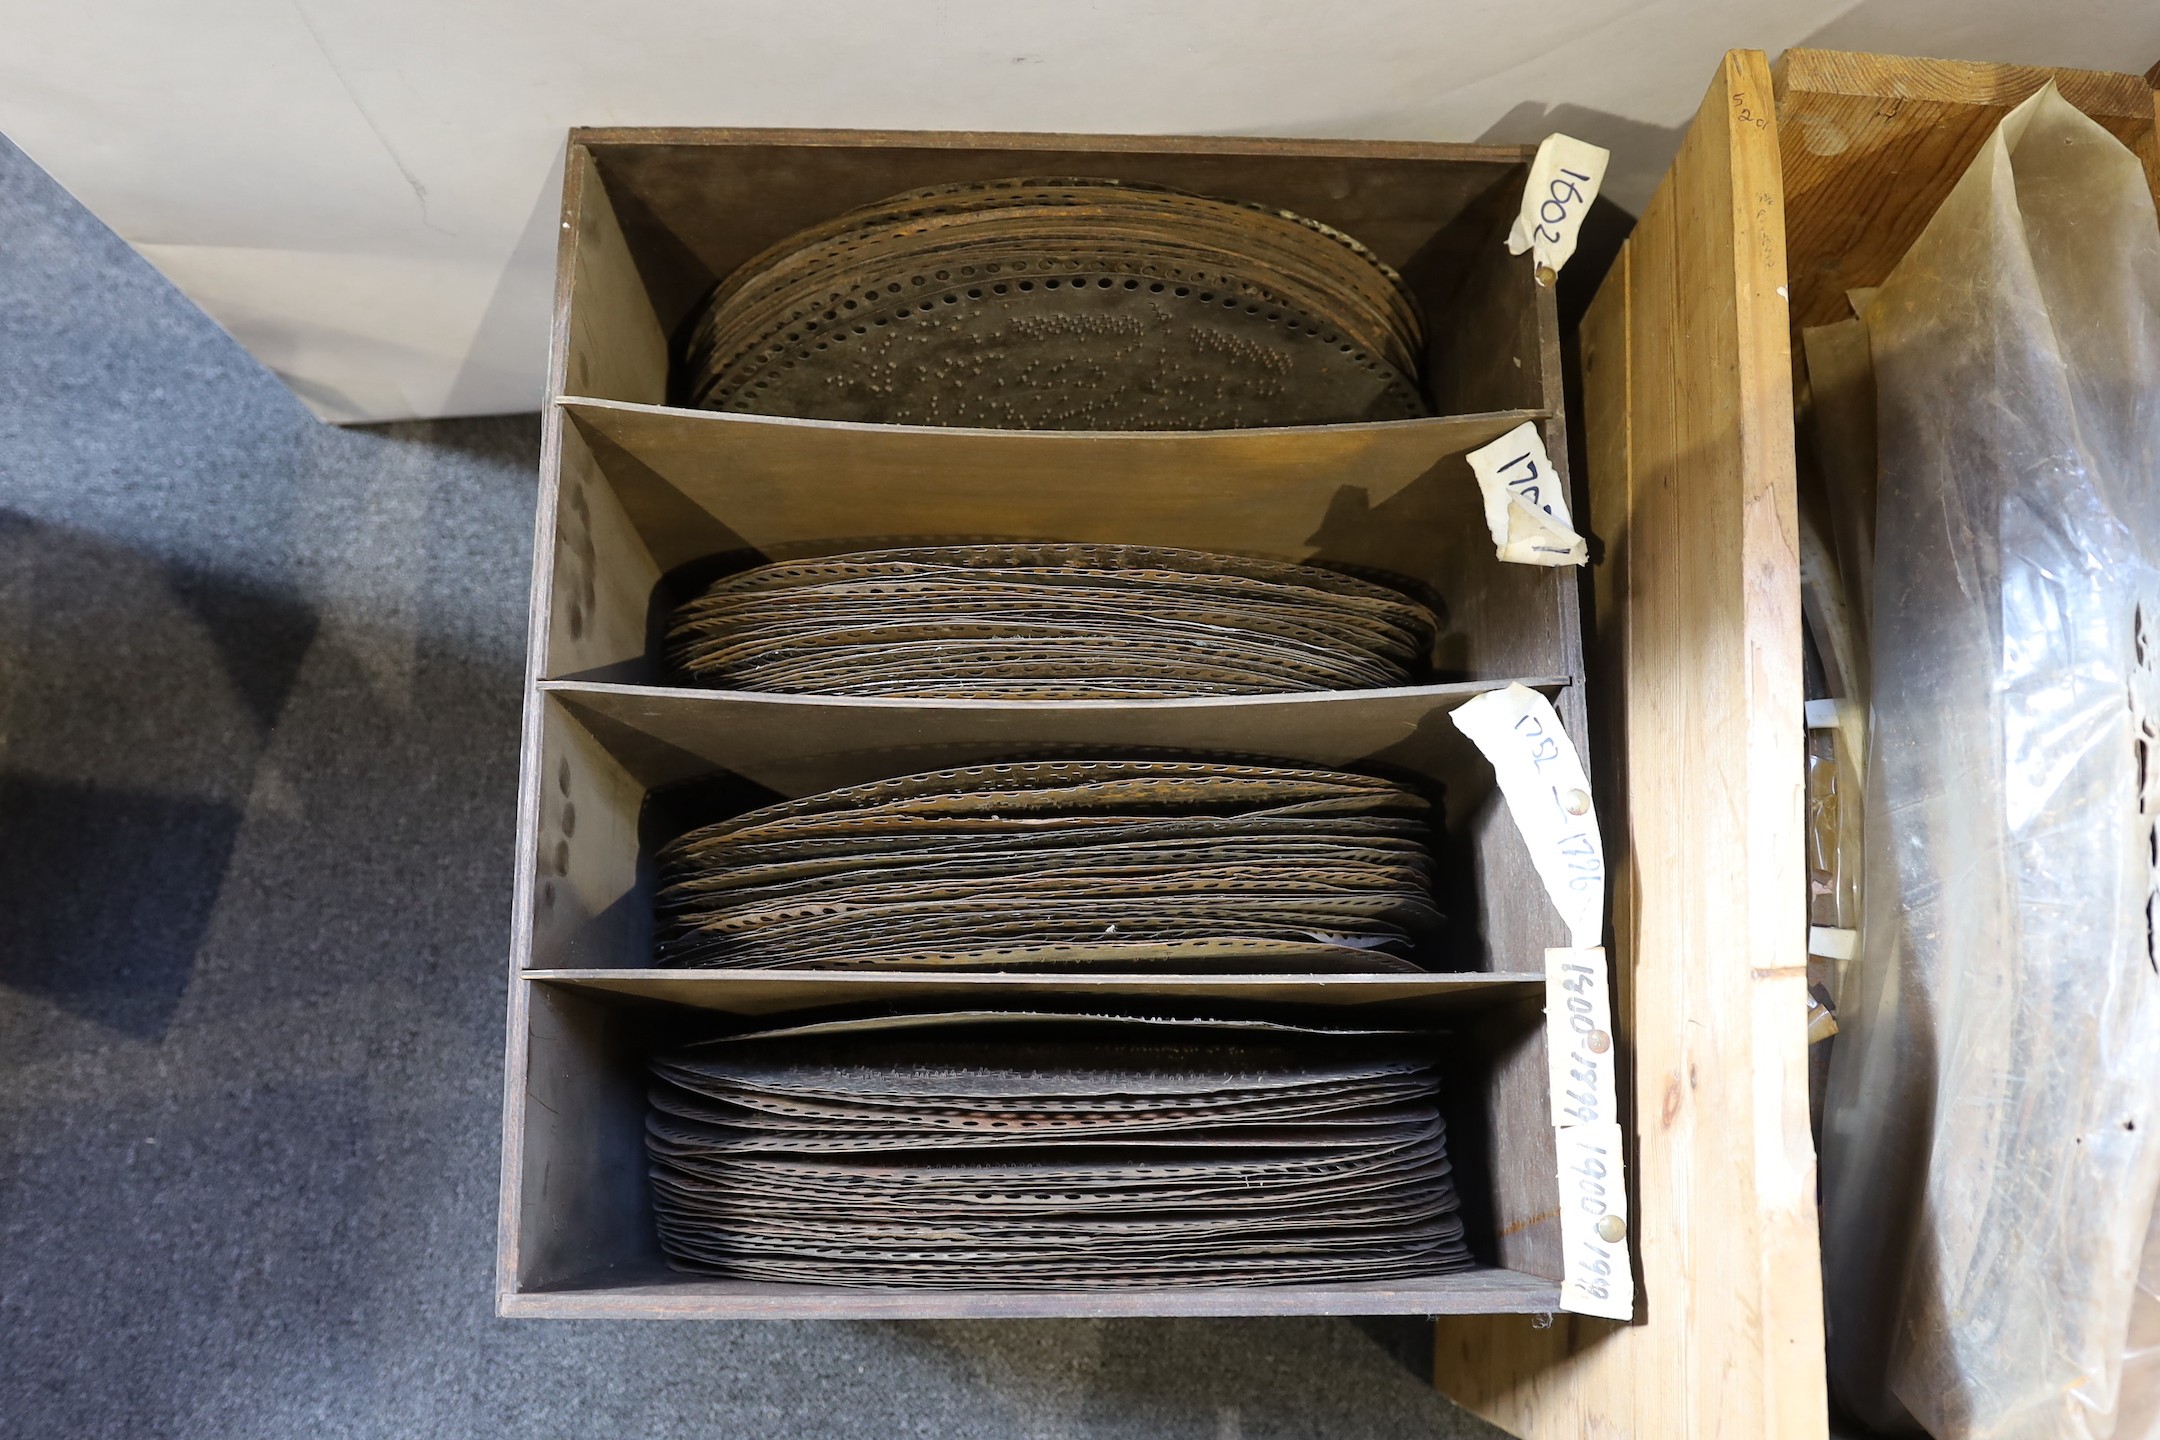 A collection of approximately 250 17-17.25 inch Polyphon discs